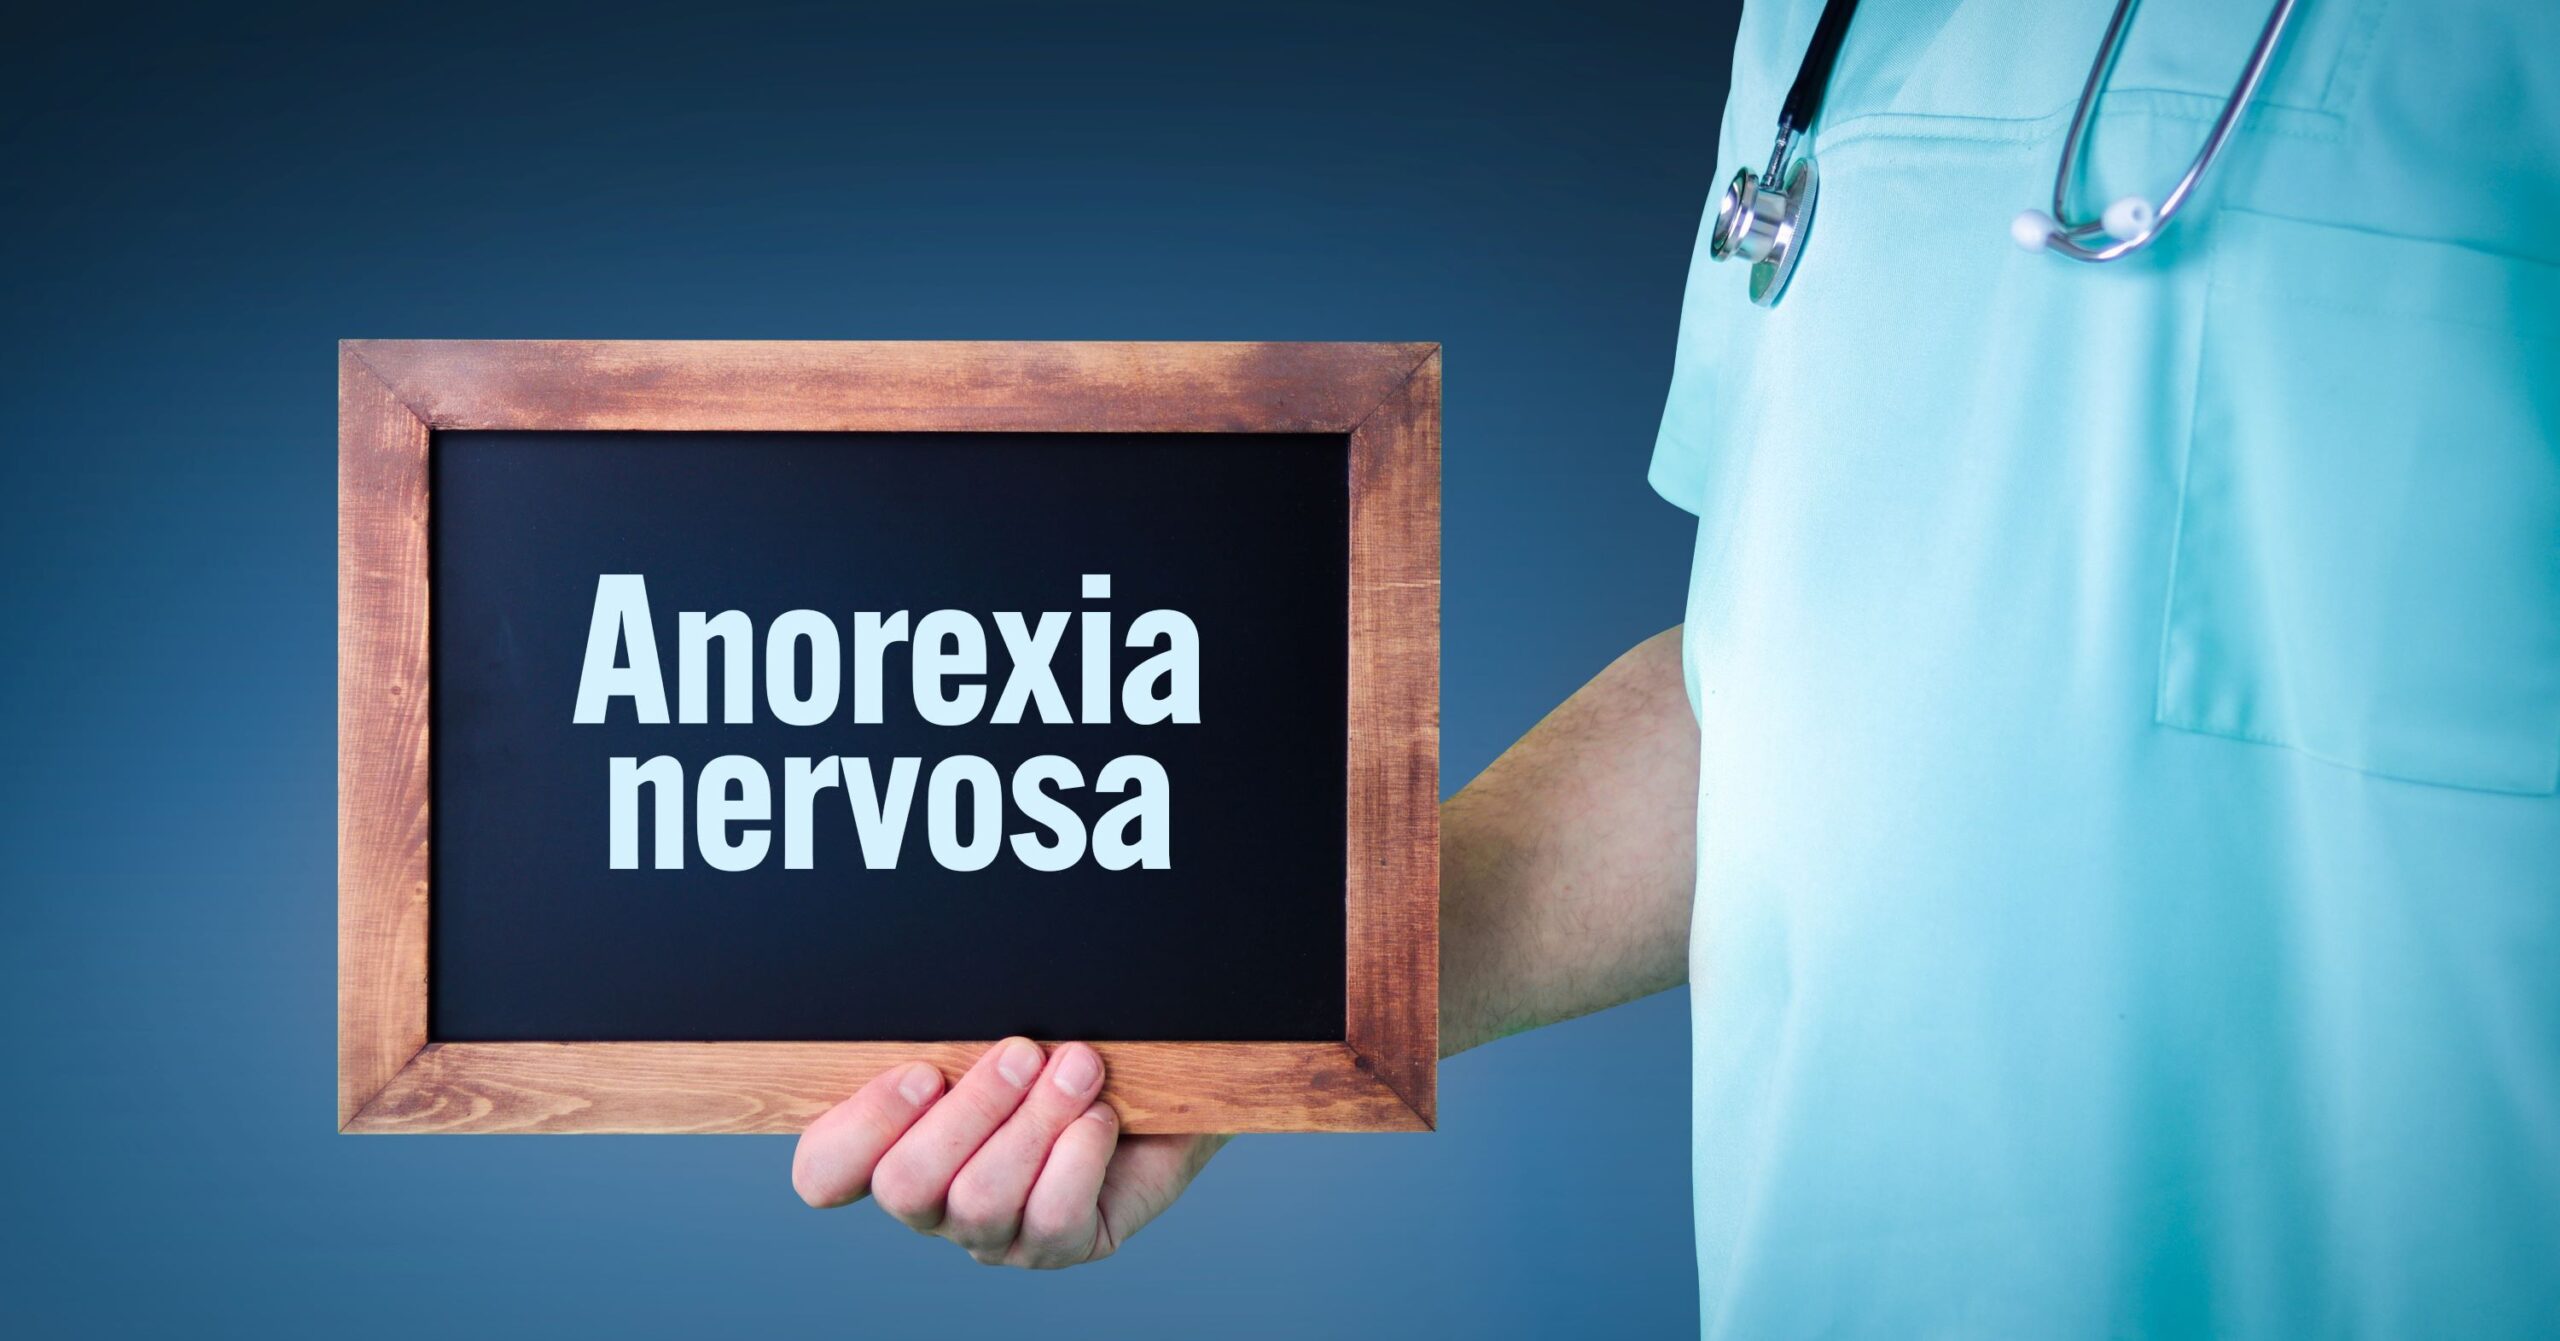 Link Between Early Birds And Anorexia Nervosa